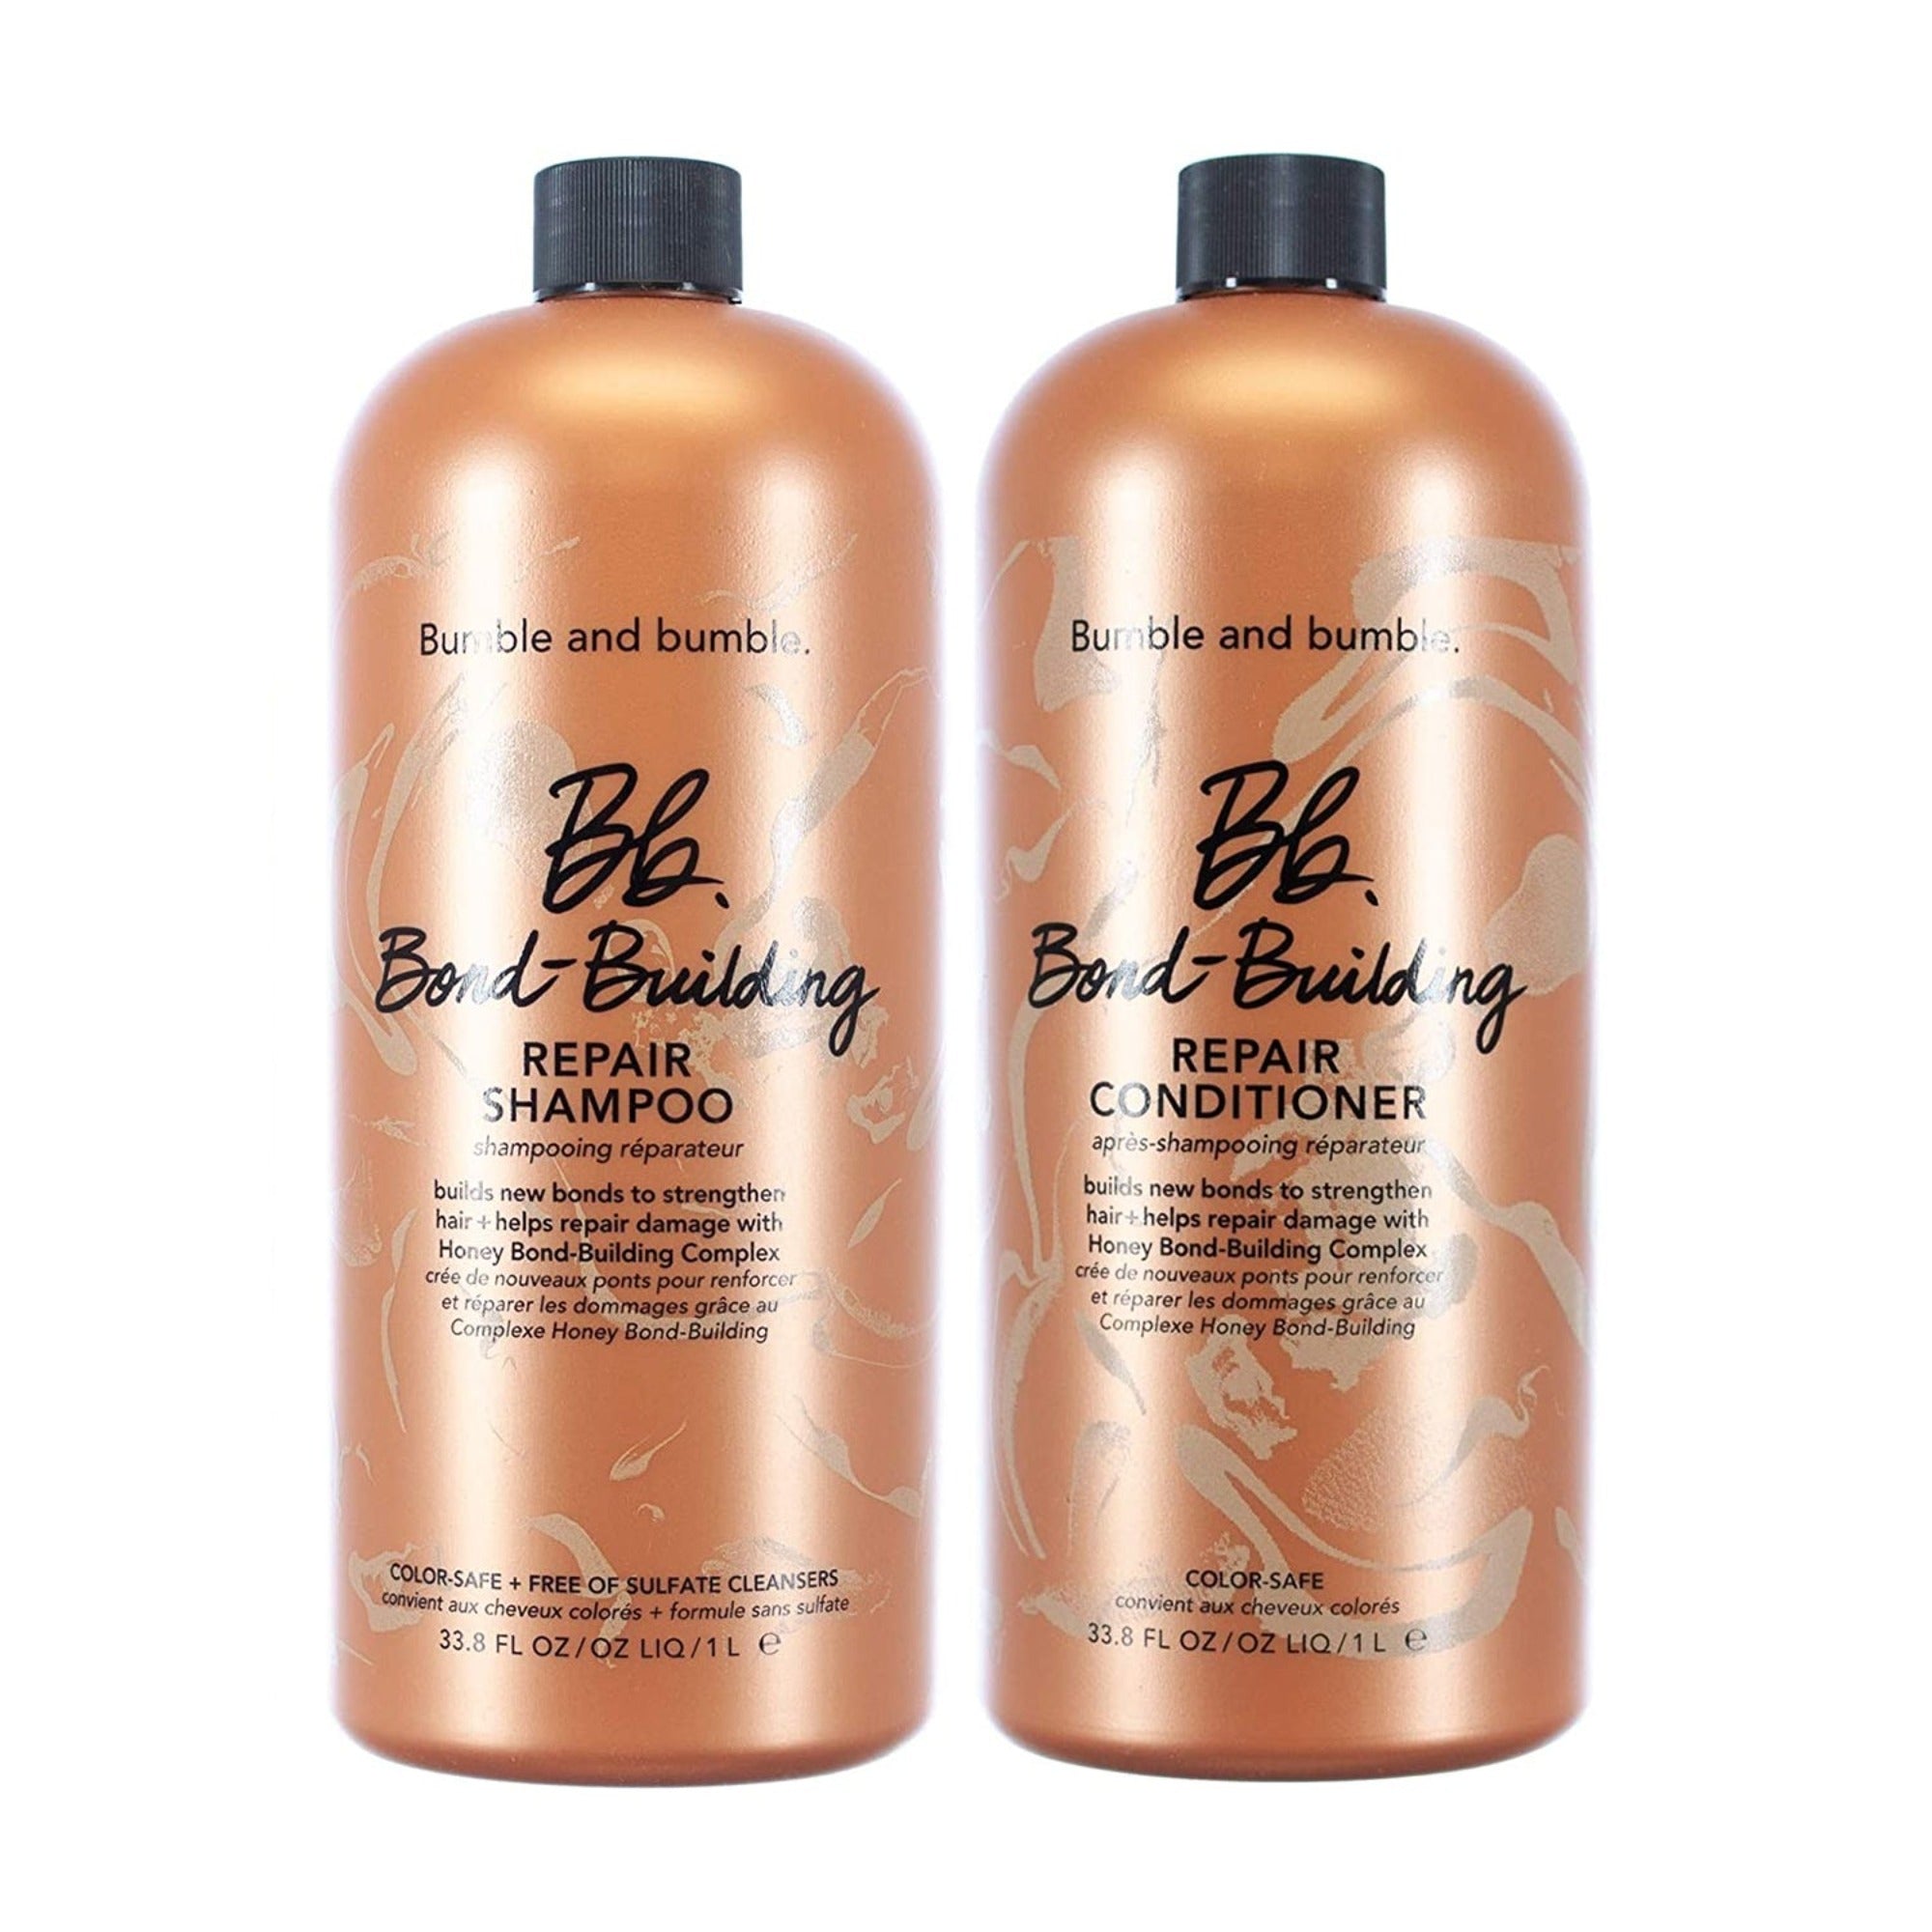 Bumble and bumble Bond Building Shampoo and Conditioner Liter Duo ($200 Value) / LITER